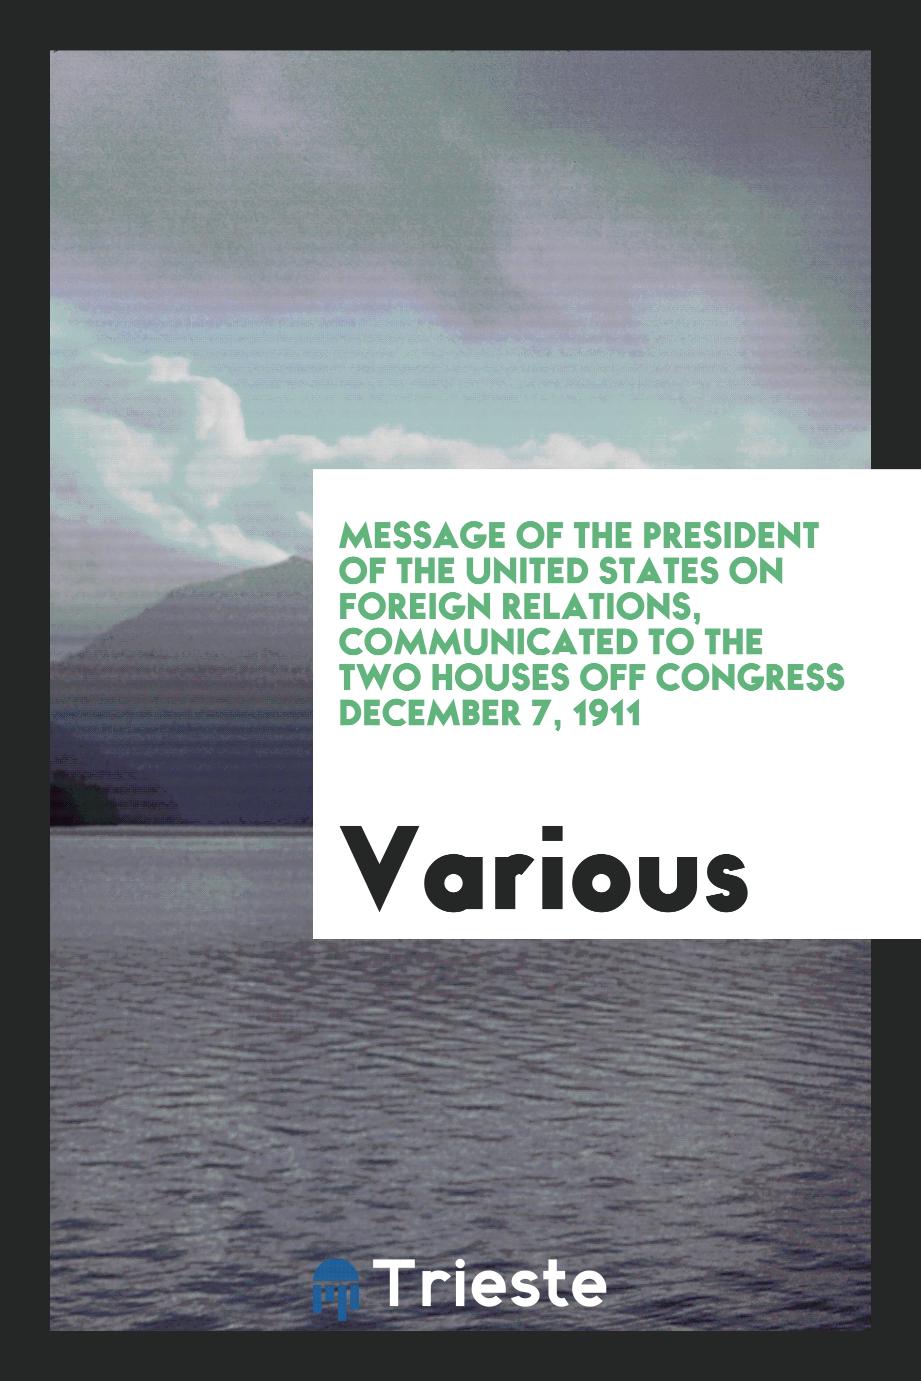 Message of the President of the United States on foreign relations, communicated to the two houses off Congress December 7, 1911